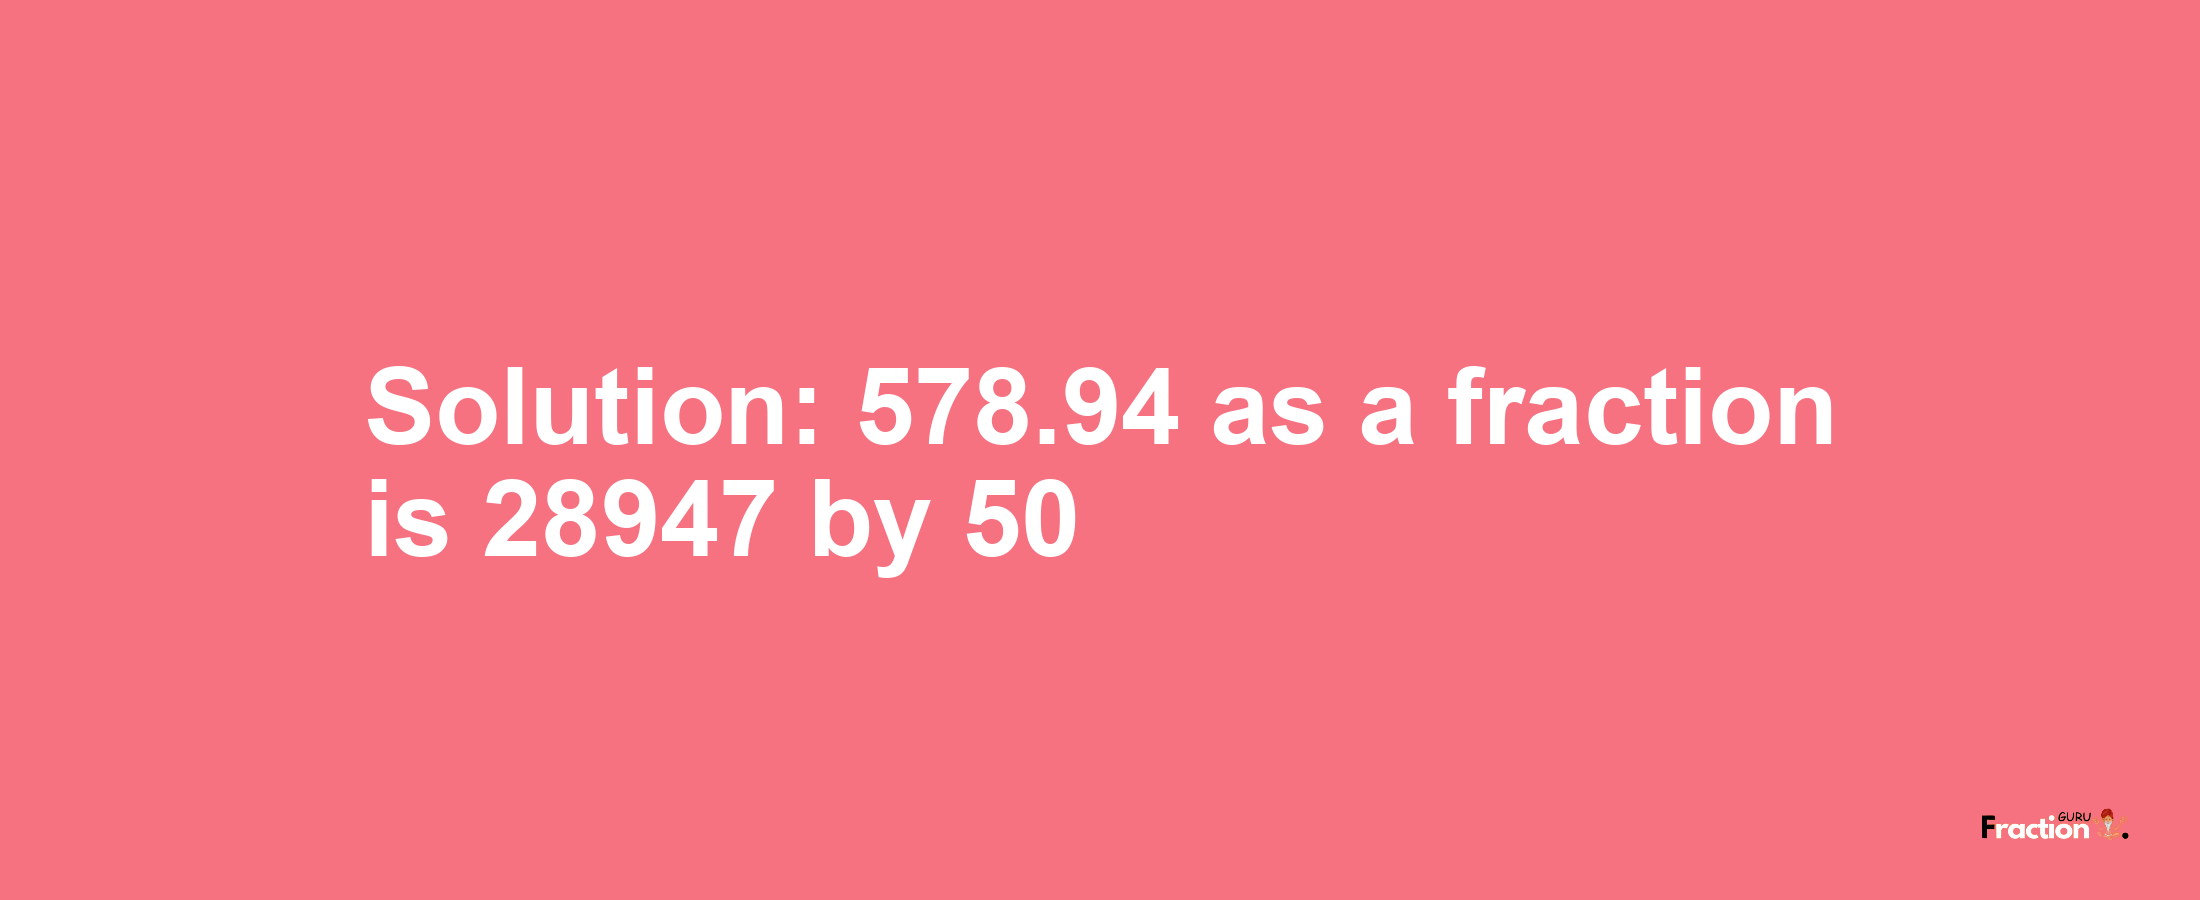 Solution:578.94 as a fraction is 28947/50